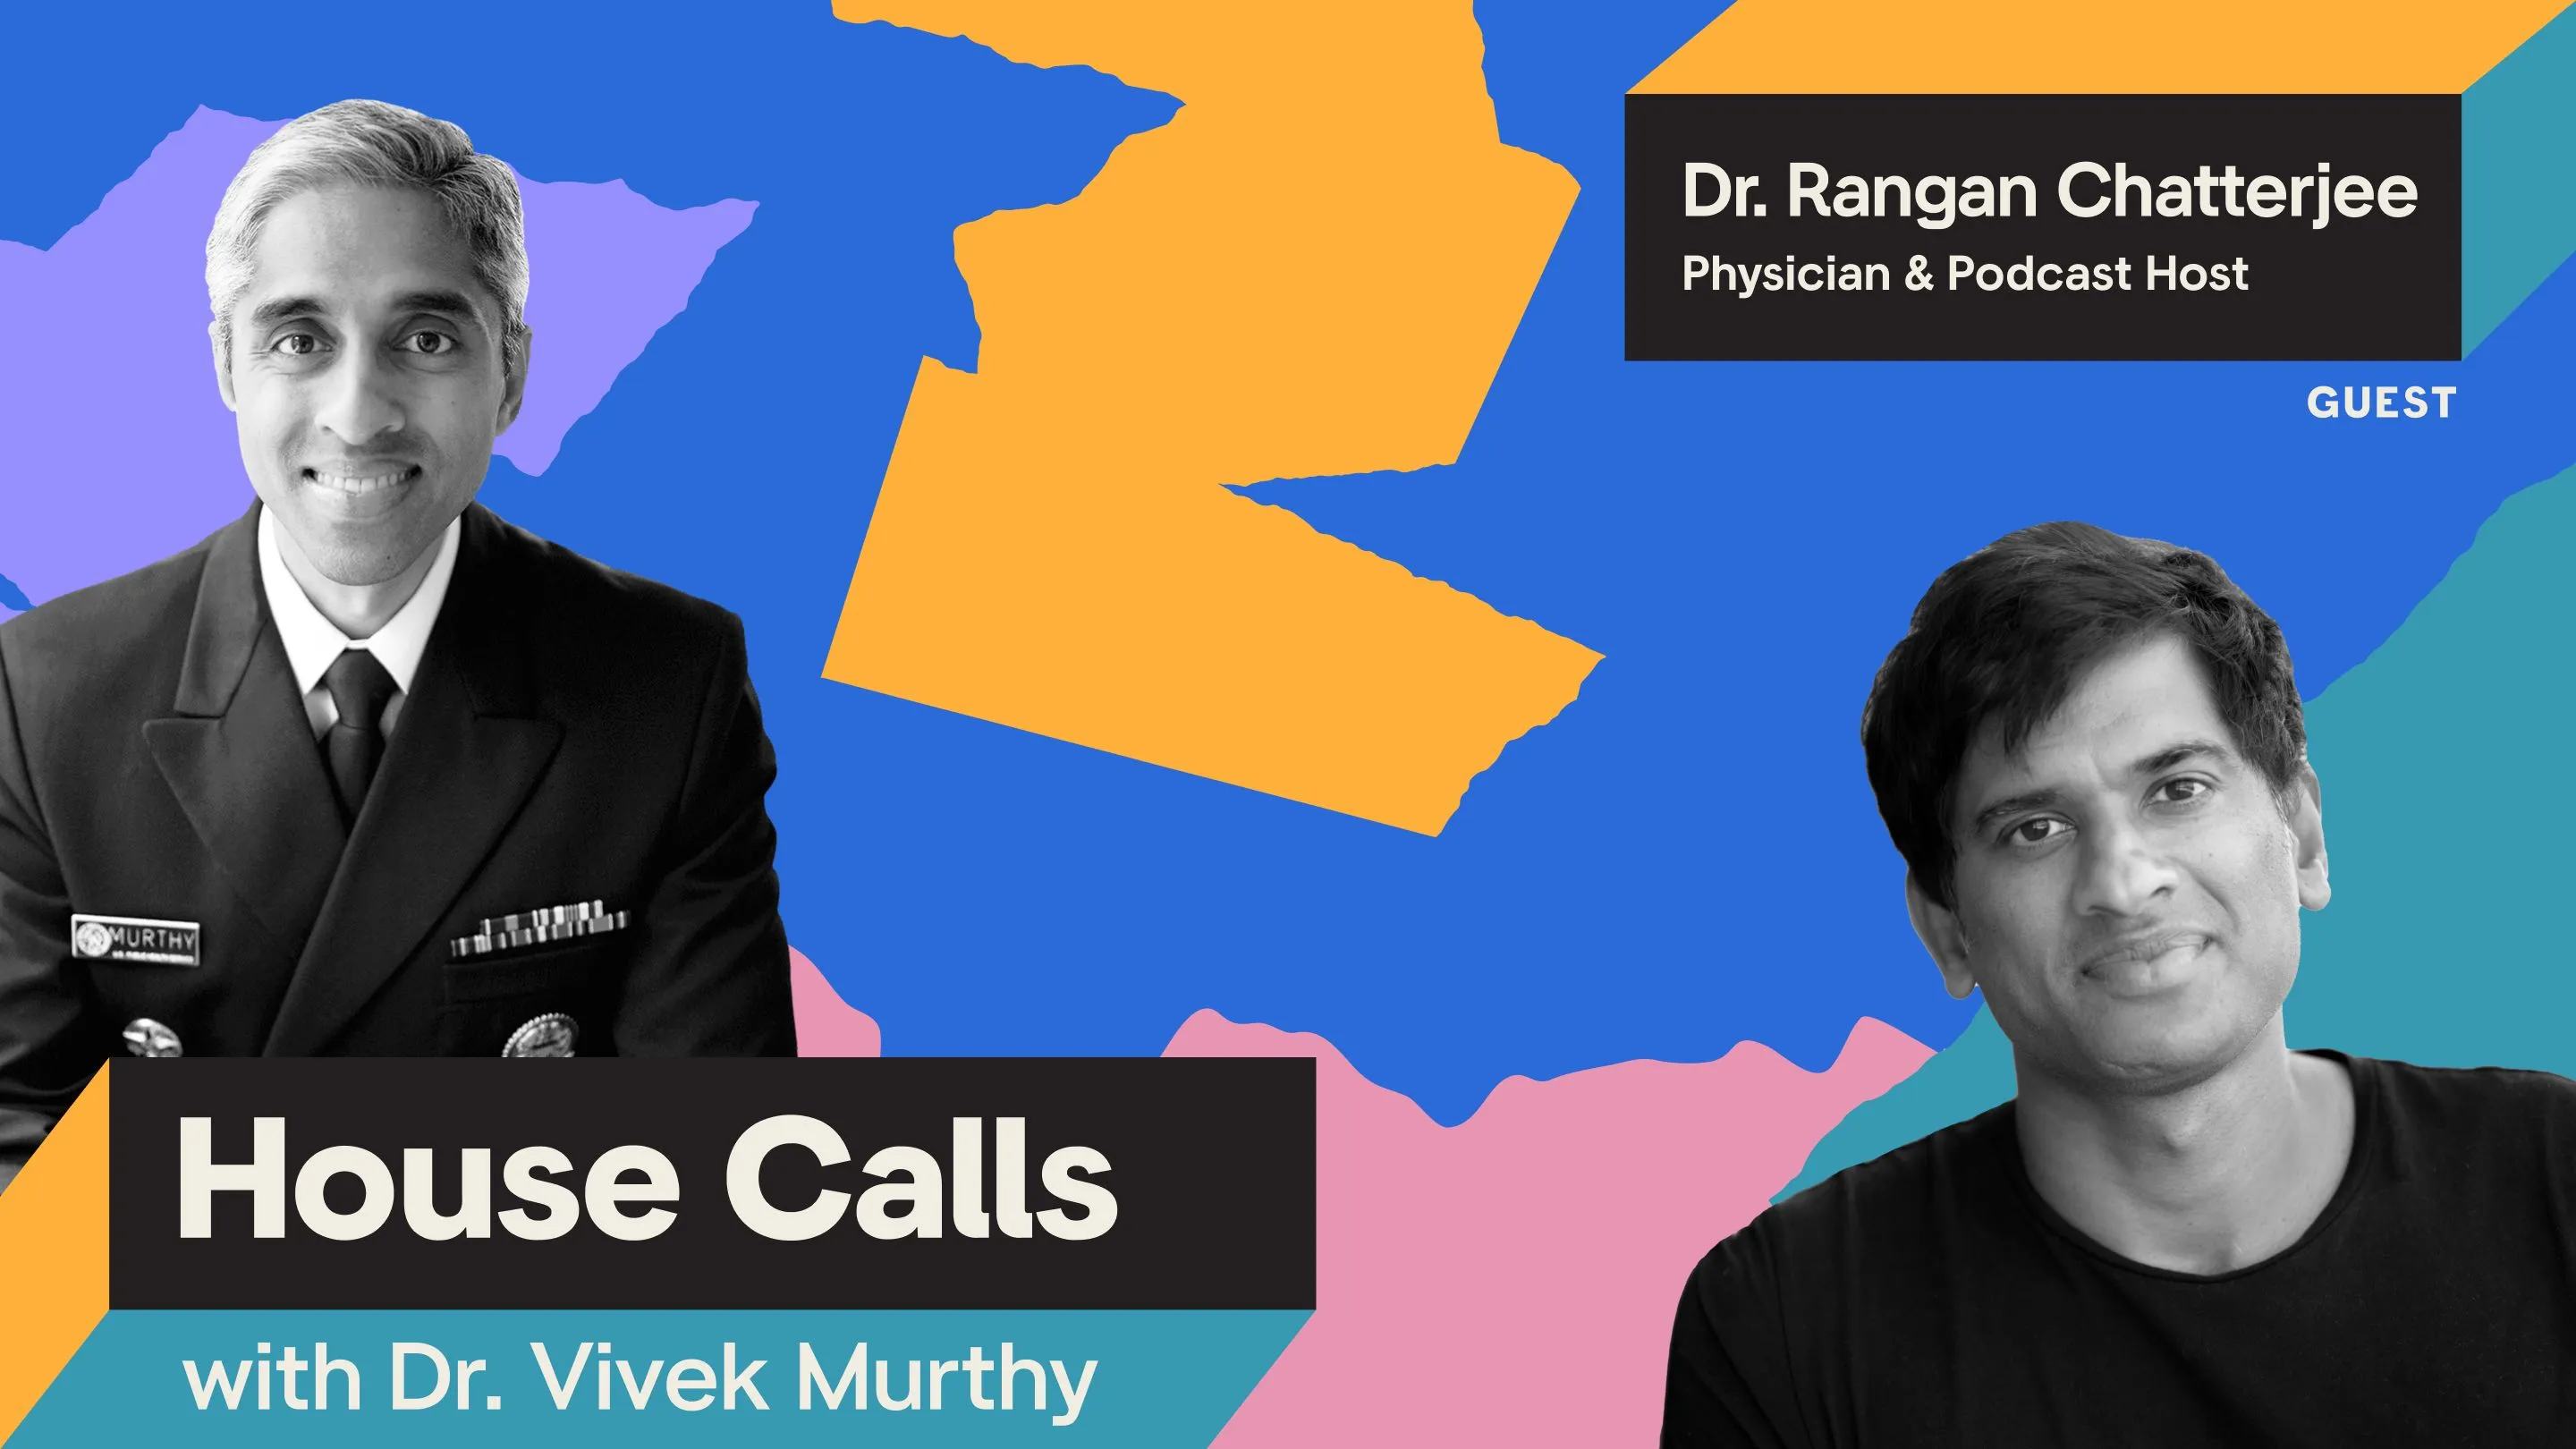 Black and white portraits of Surgeon General Vivek Murthy and Dr. Rangan Chatterjee with a colorful background.